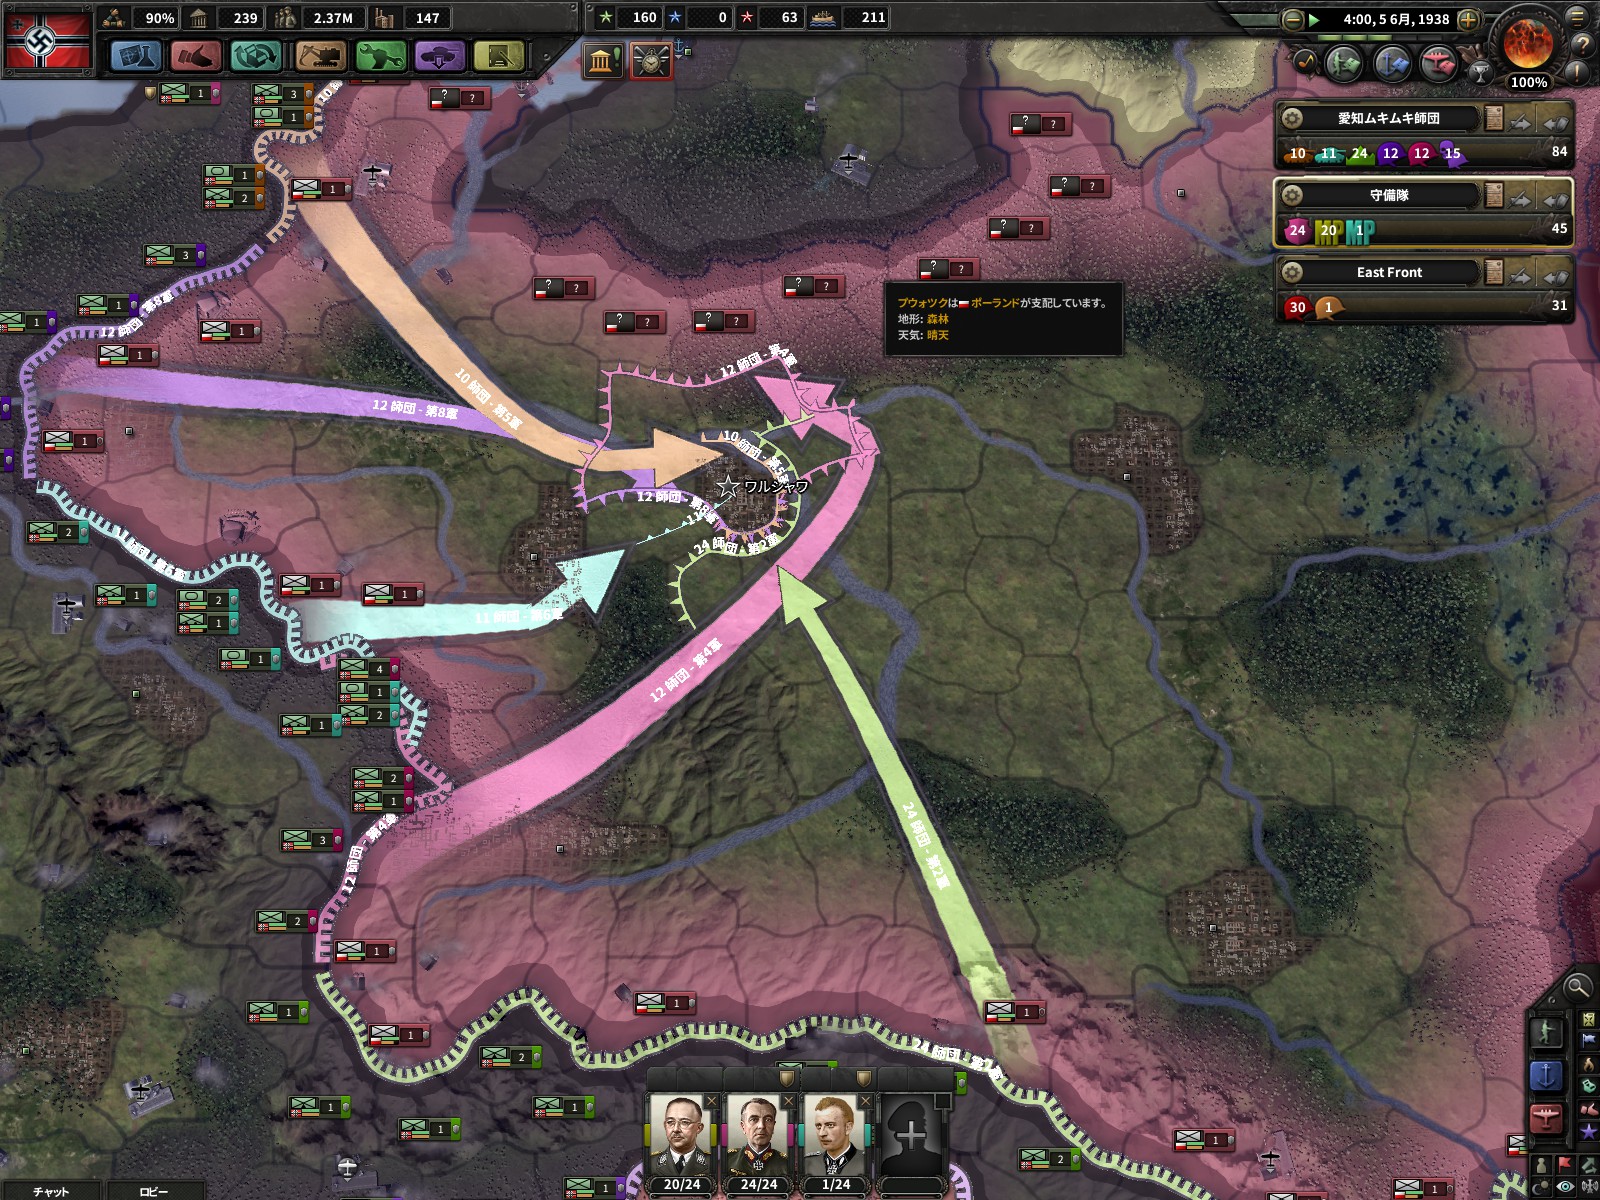 hearts of iron iv steam